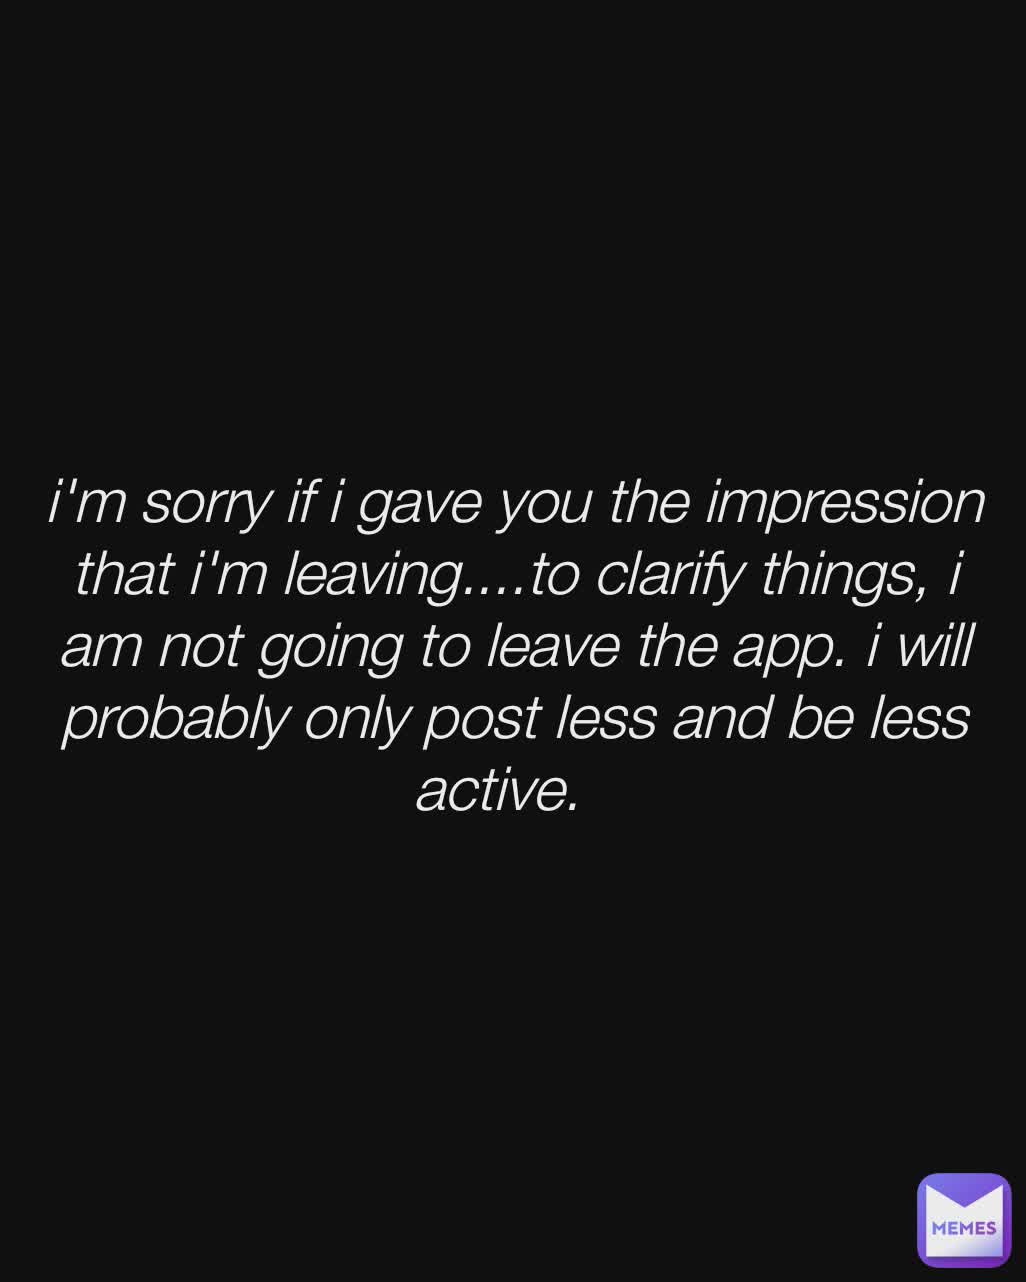 i'm sorry if i gave you the impression that i'm leaving....to clarify things, i am not going to leave the app. i will probably only post less and be less active.